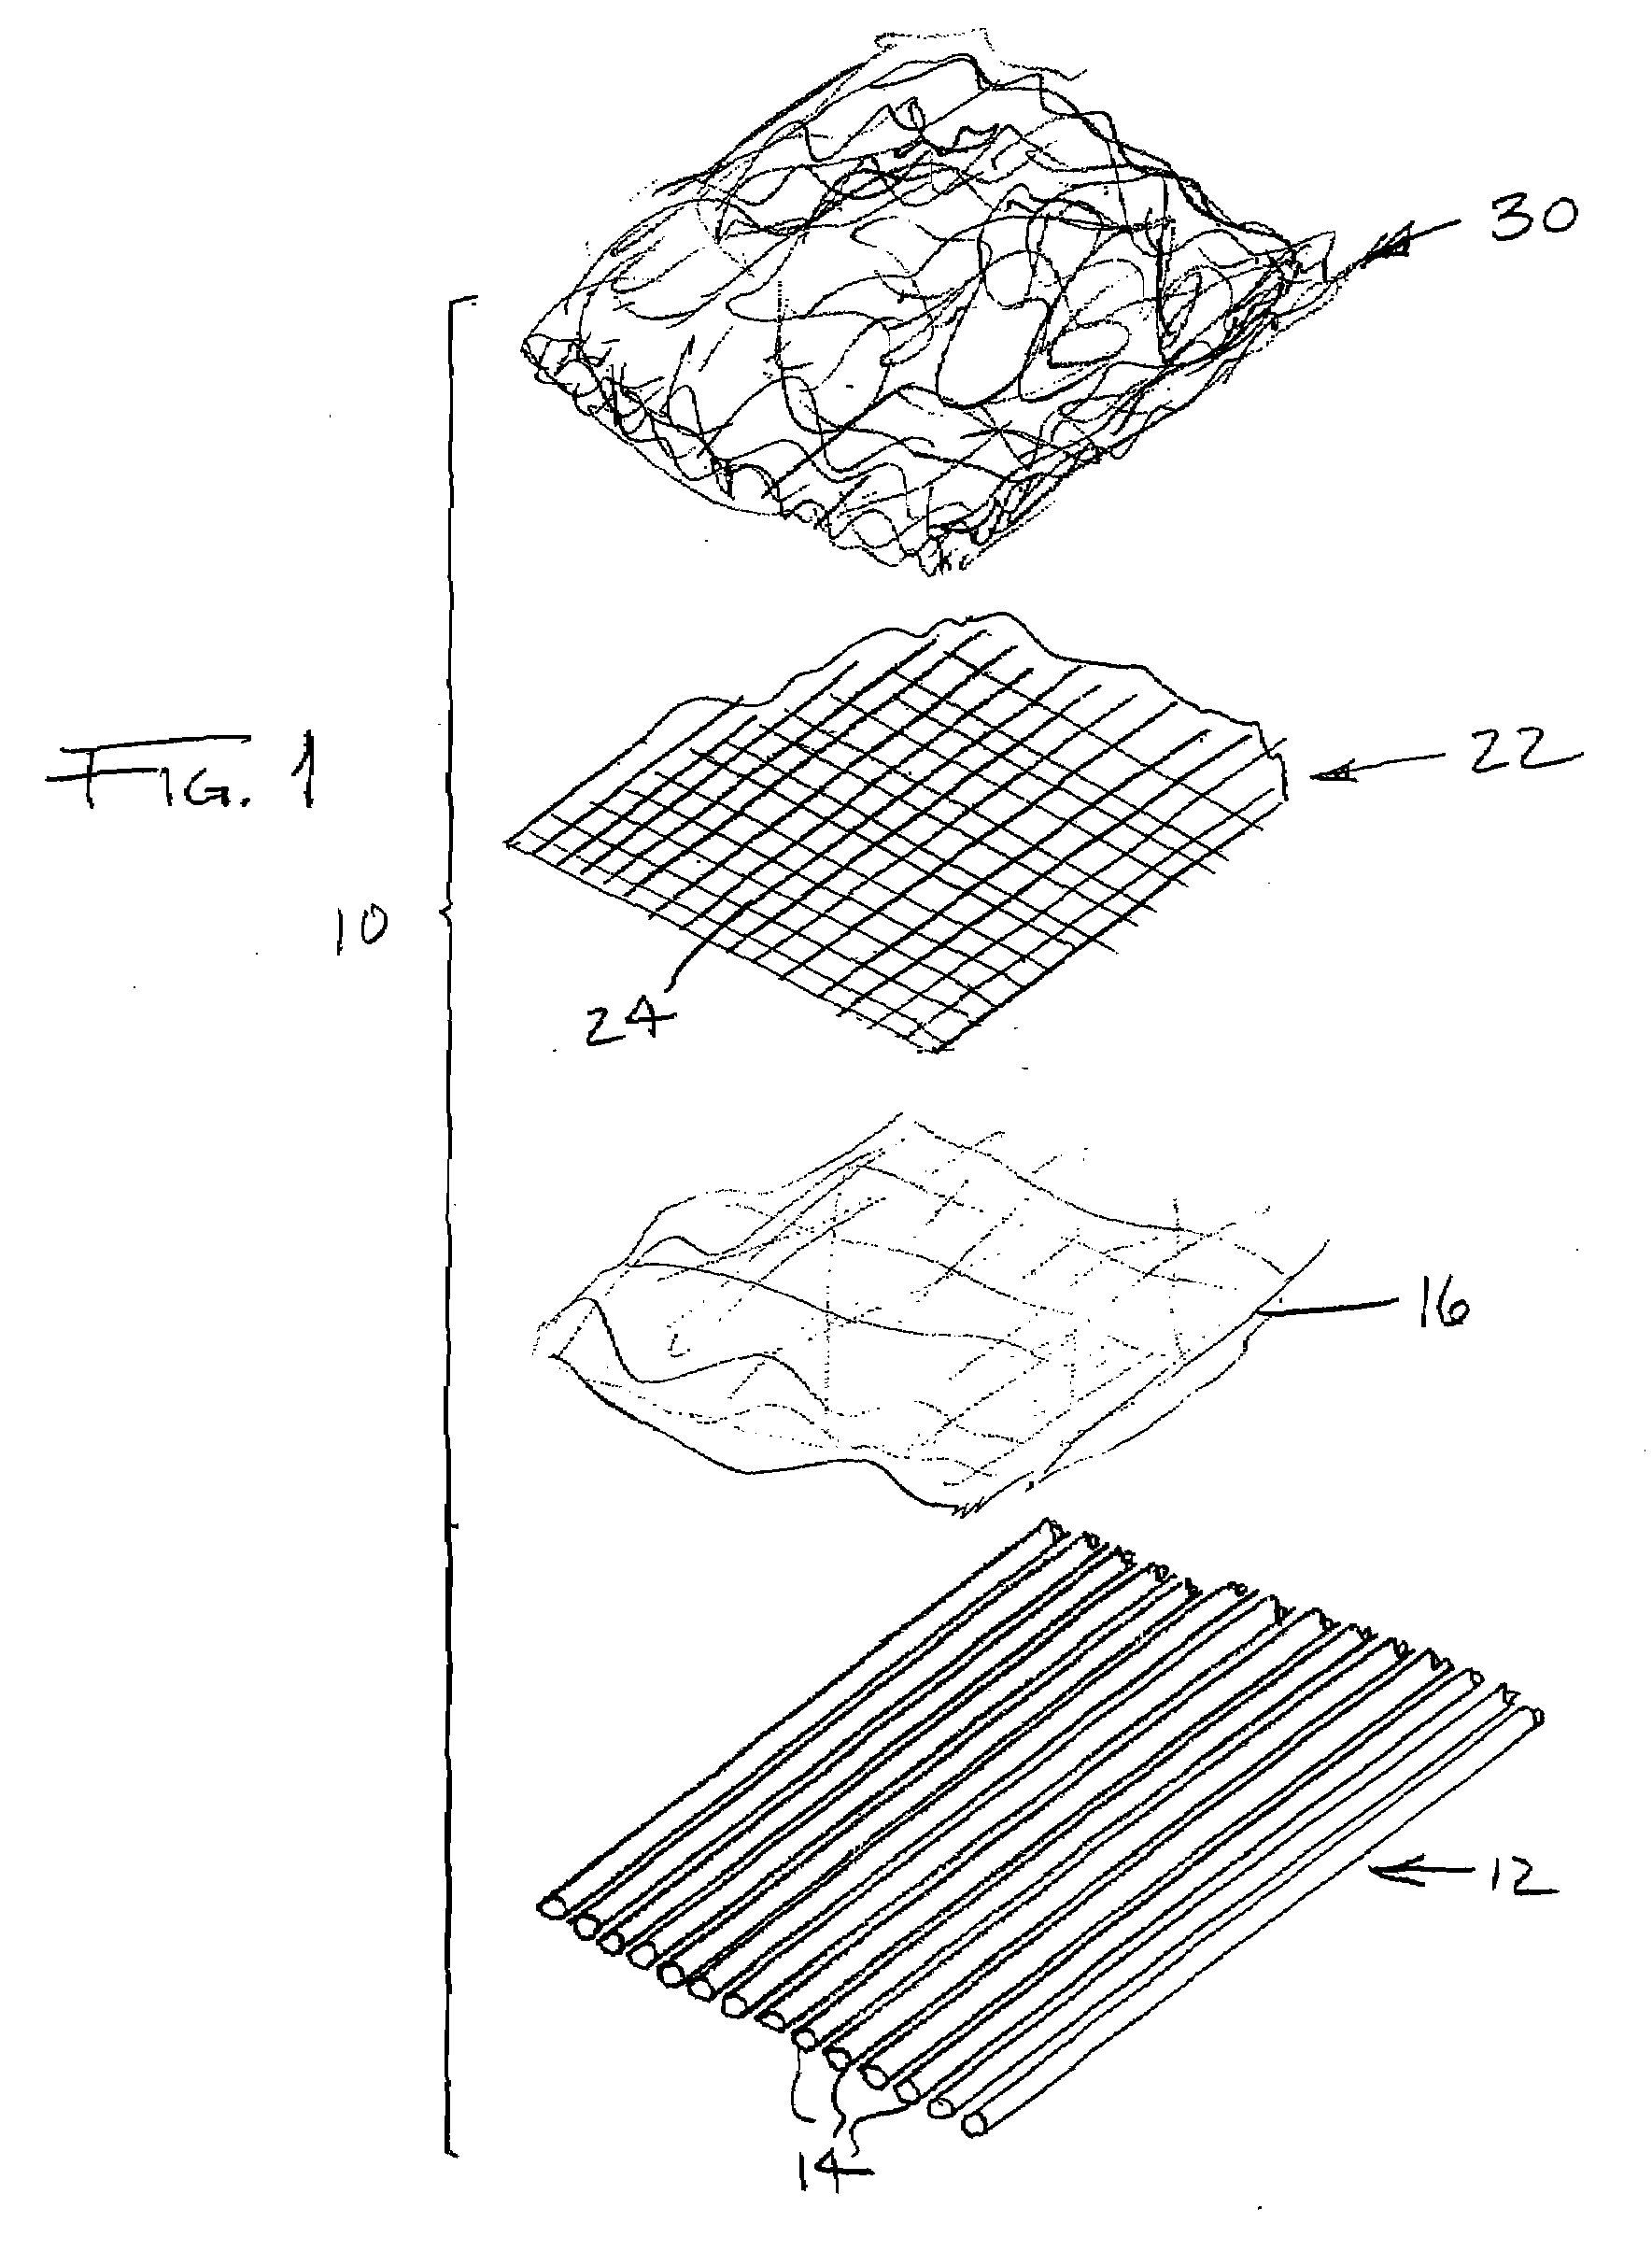 Nonwoven textile assembly, method of manufacture, and spirally wound press felt comprised of same